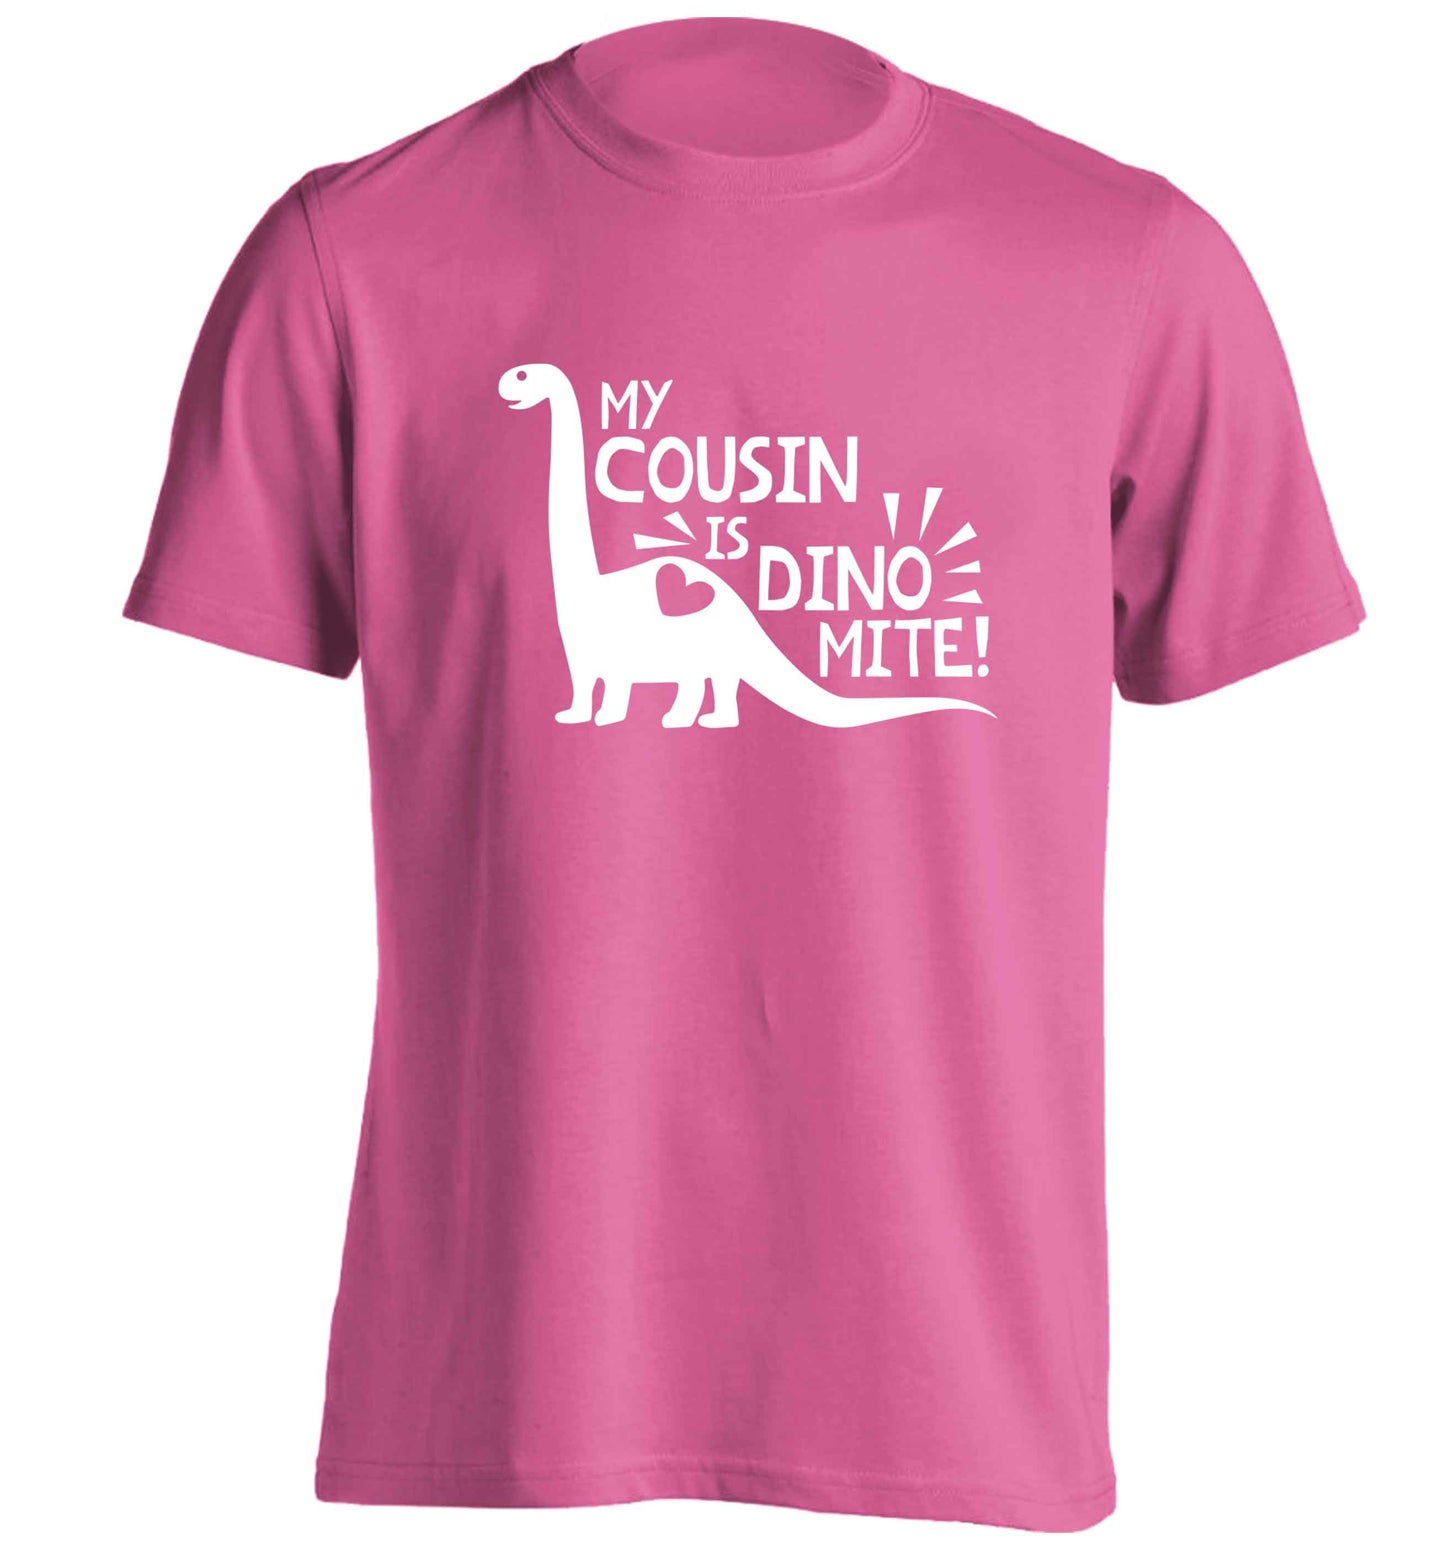 My cousin is dinomite! adults unisex pink Tshirt 2XL